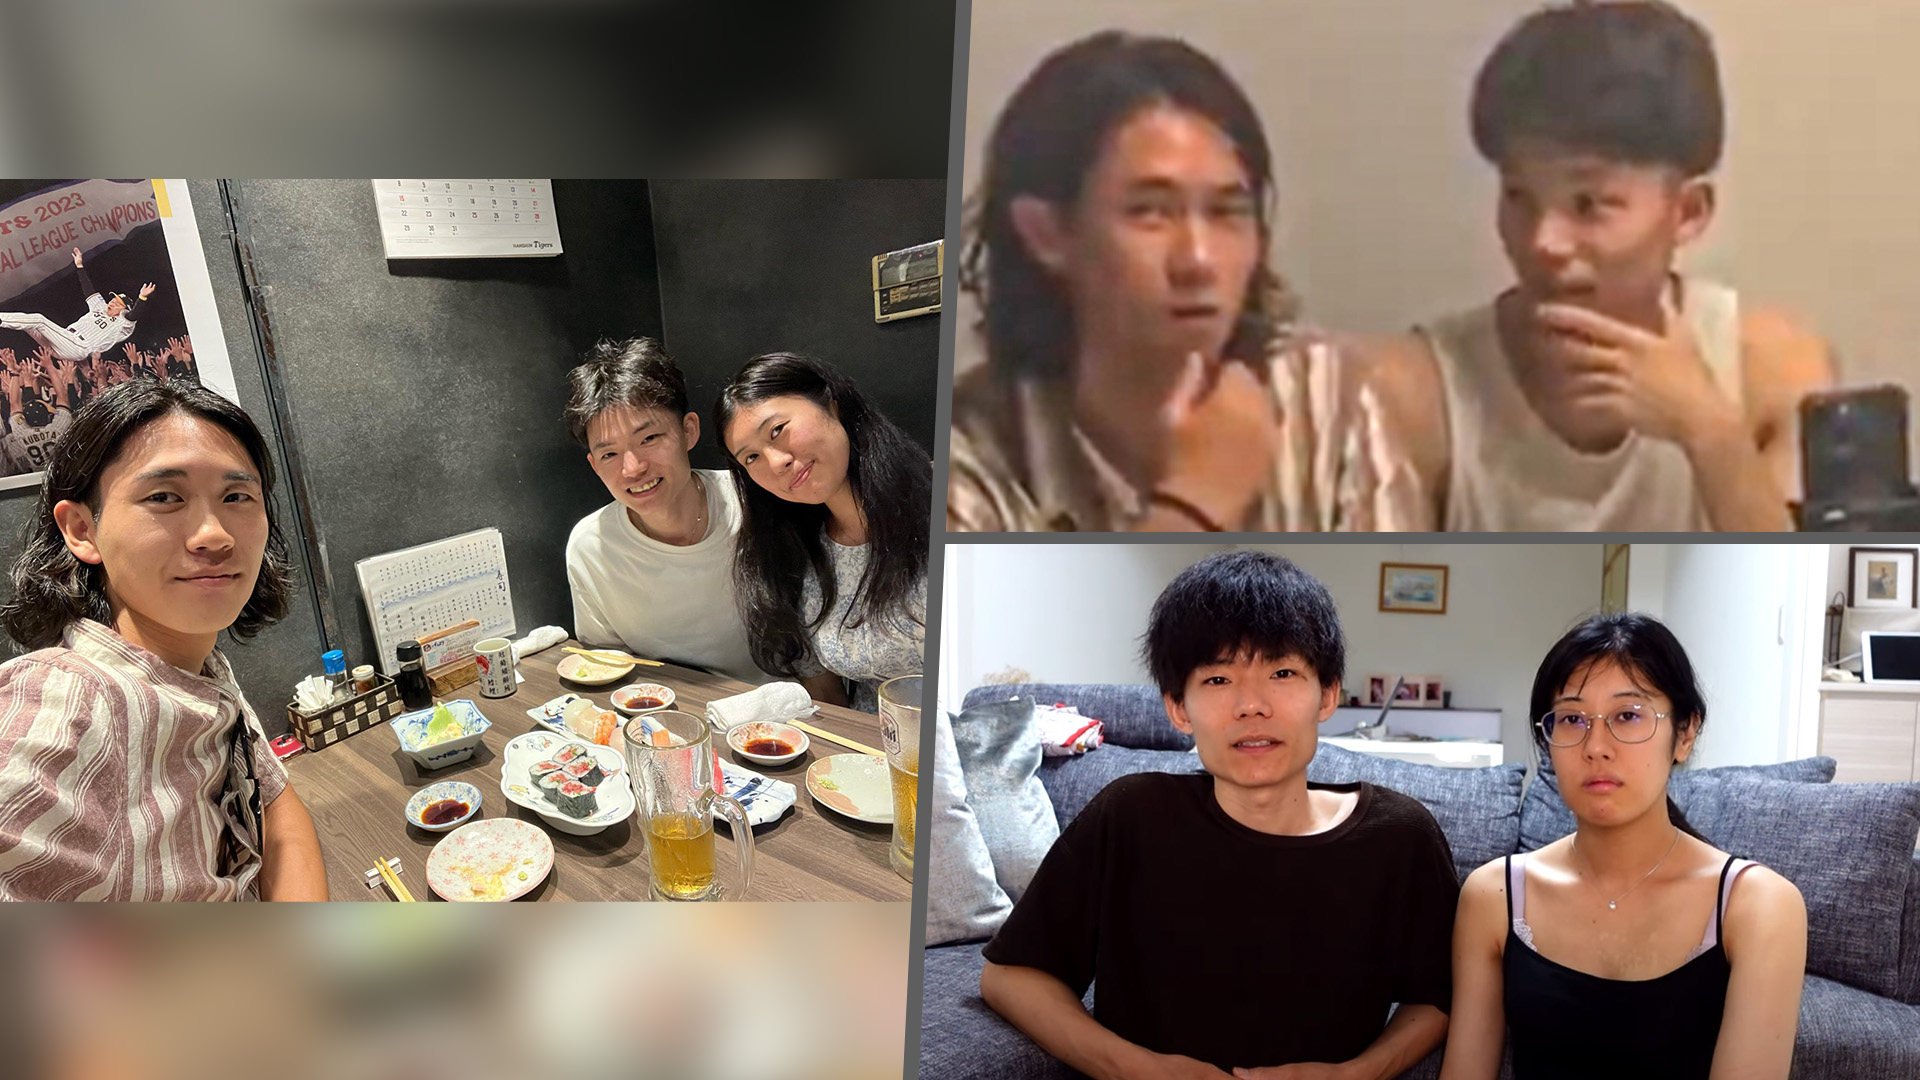 Japanese man tells of the unusual life he shares with his wife and her lover. Photo: SCMP composite/YouTube/X.com/threads.net@tounyu_ohji